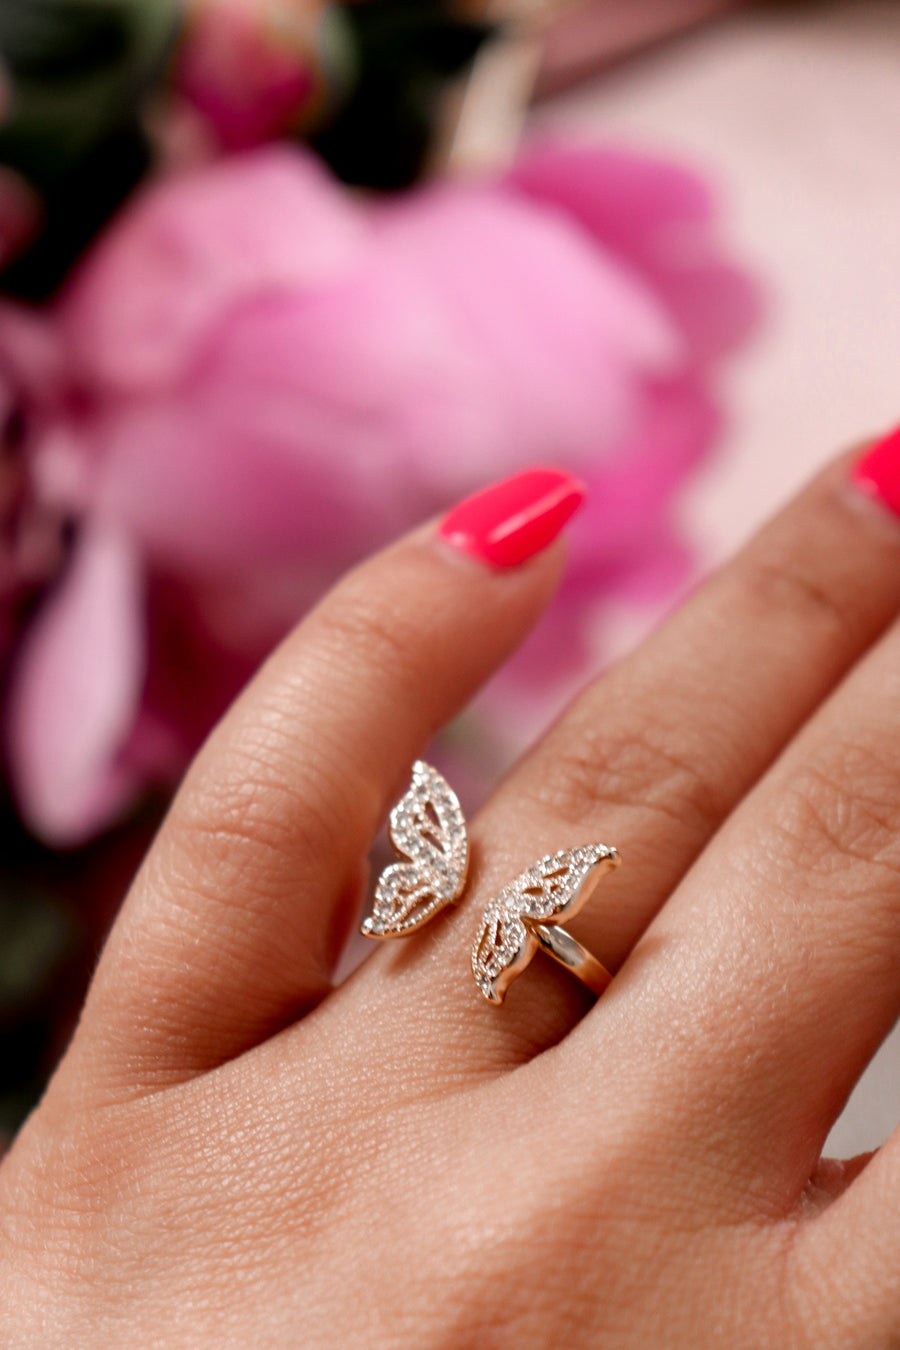 Mariposa | butterfly ring